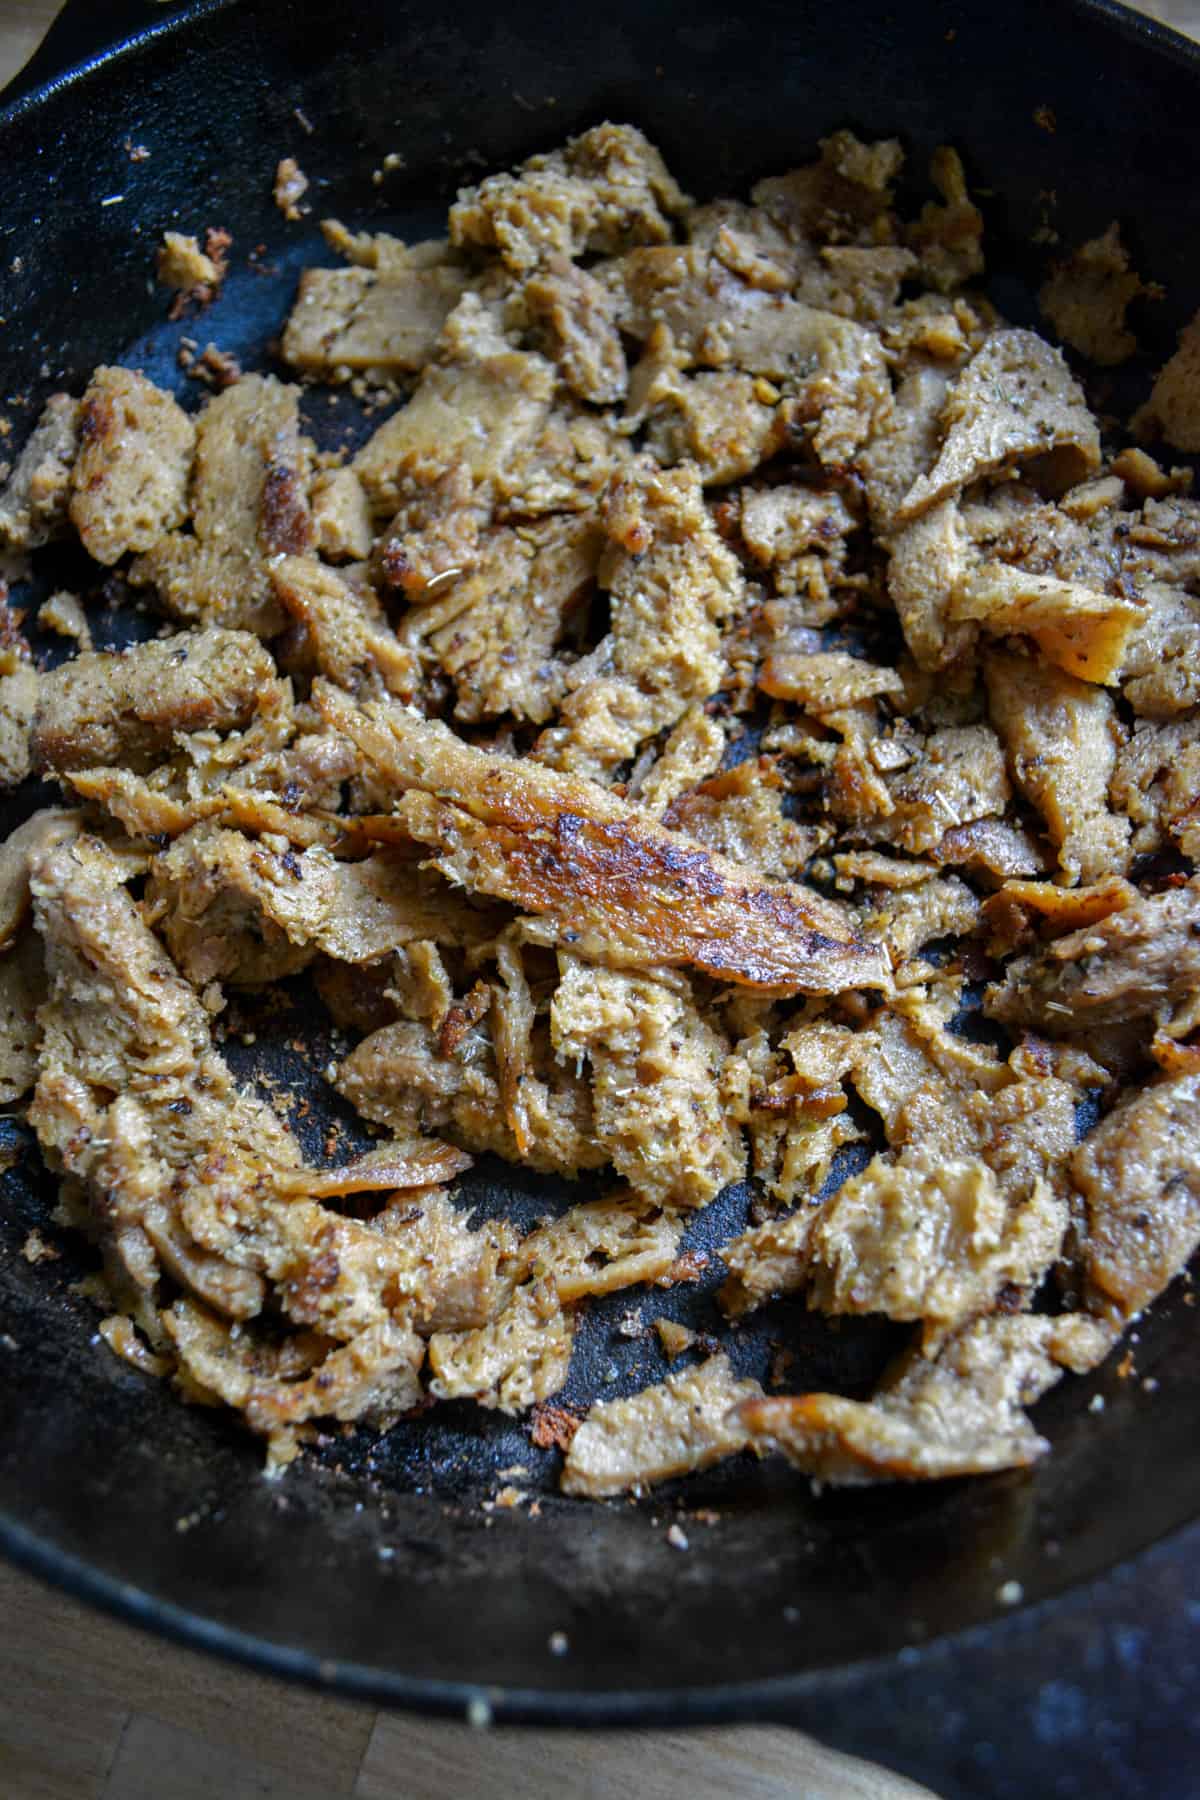 Seitan finished cooking in a cast iron skillet.